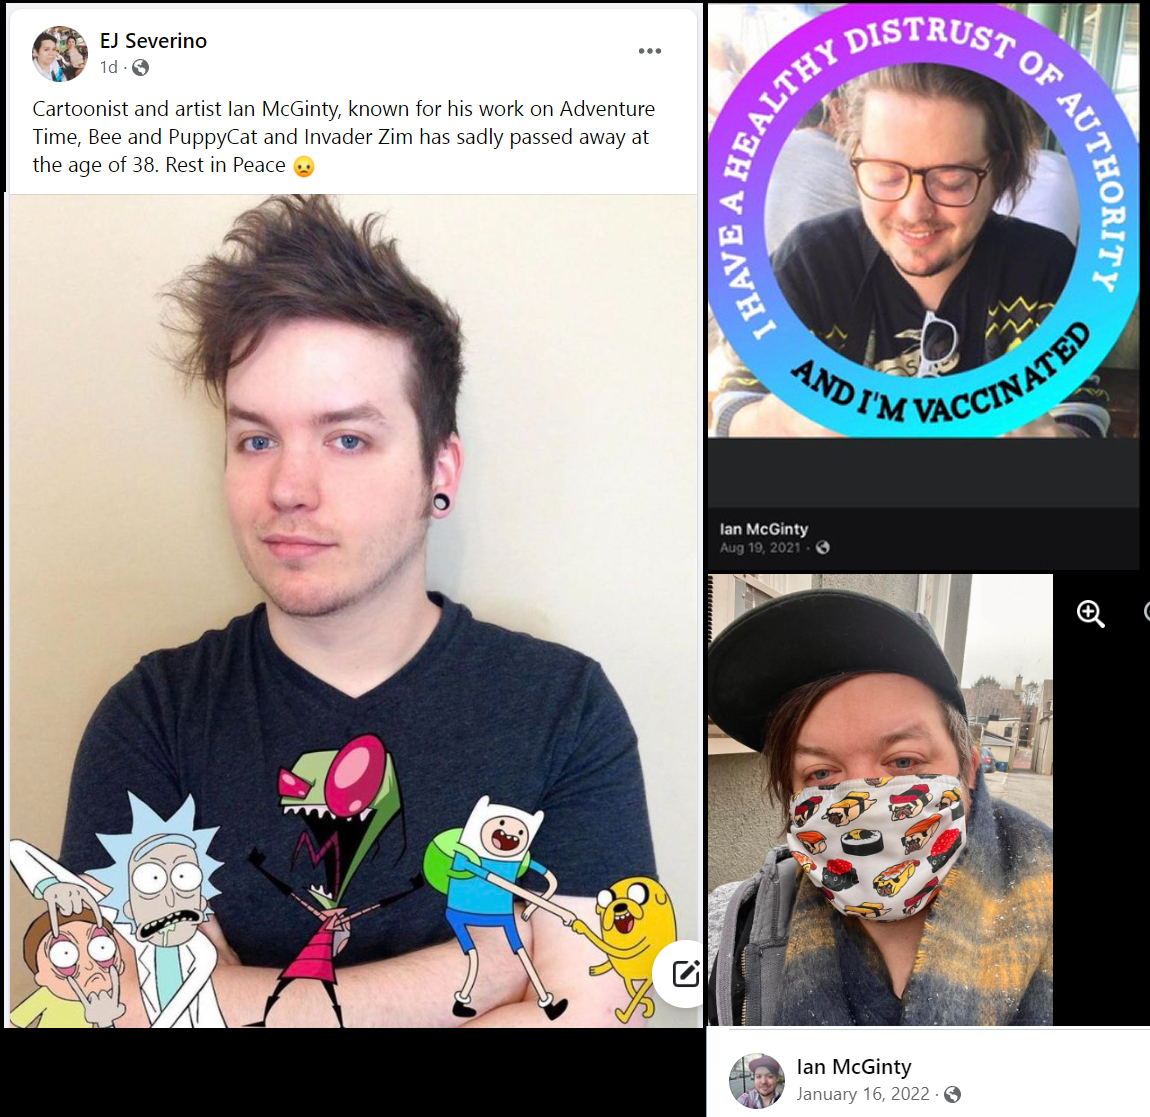 38 year old Cartoonist and artist Ian McGinty died suddenly on June 8, 2023.

McGinty's work includes comics for Invader Zim and Adventure Time

His obituary stated that he died of 'natural causes'.

Not 'natural' when you're COVID-19 mRNA vaccinated

#DiedSuddenly #cdnpoli…